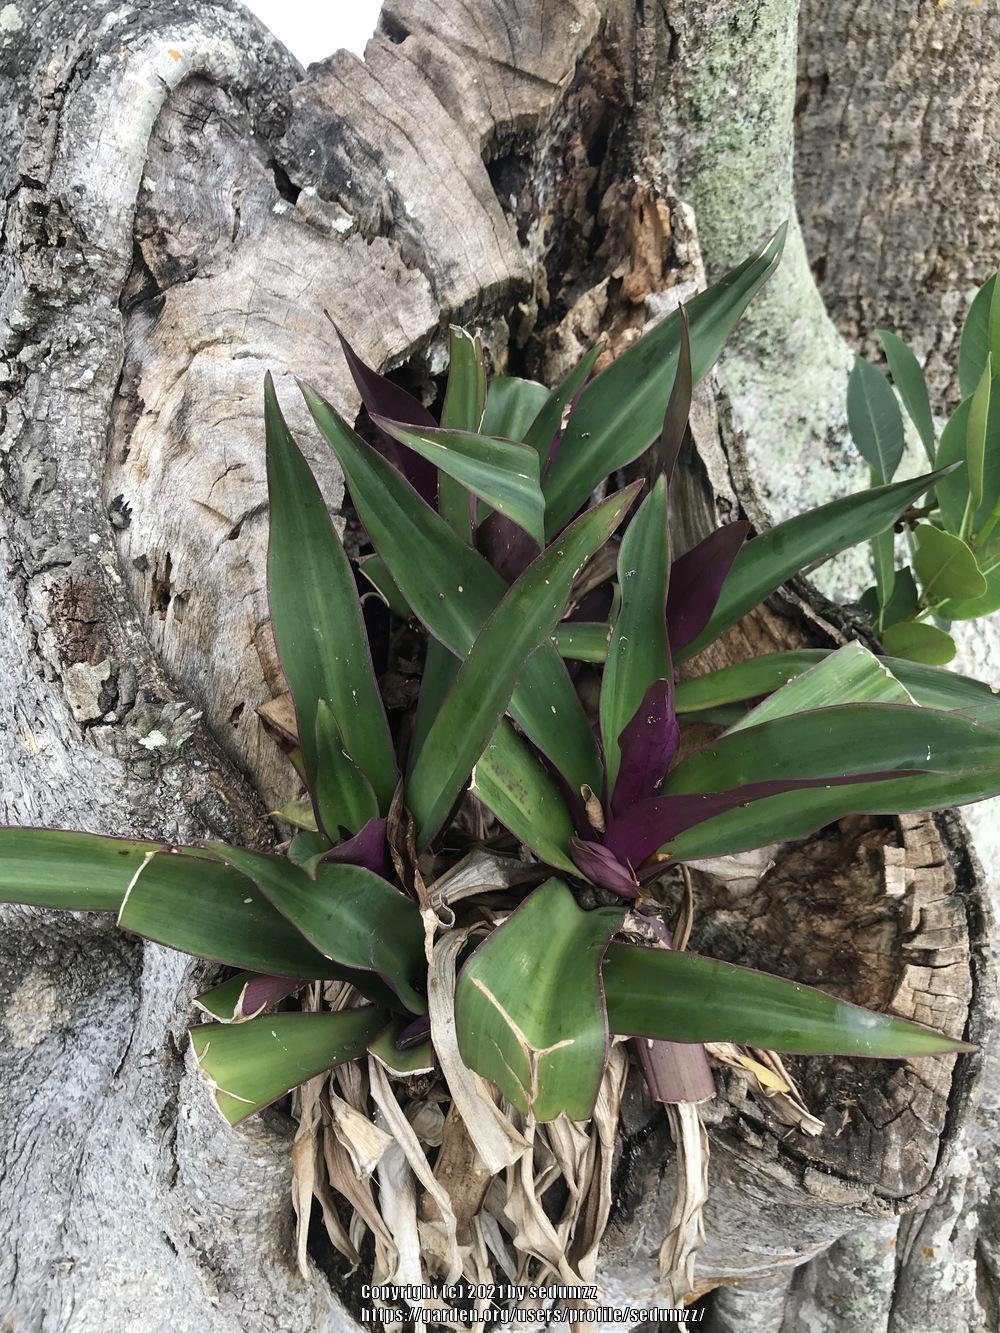 Photo of Oyster Plant (Tradescantia spathacea) uploaded by sedumzz